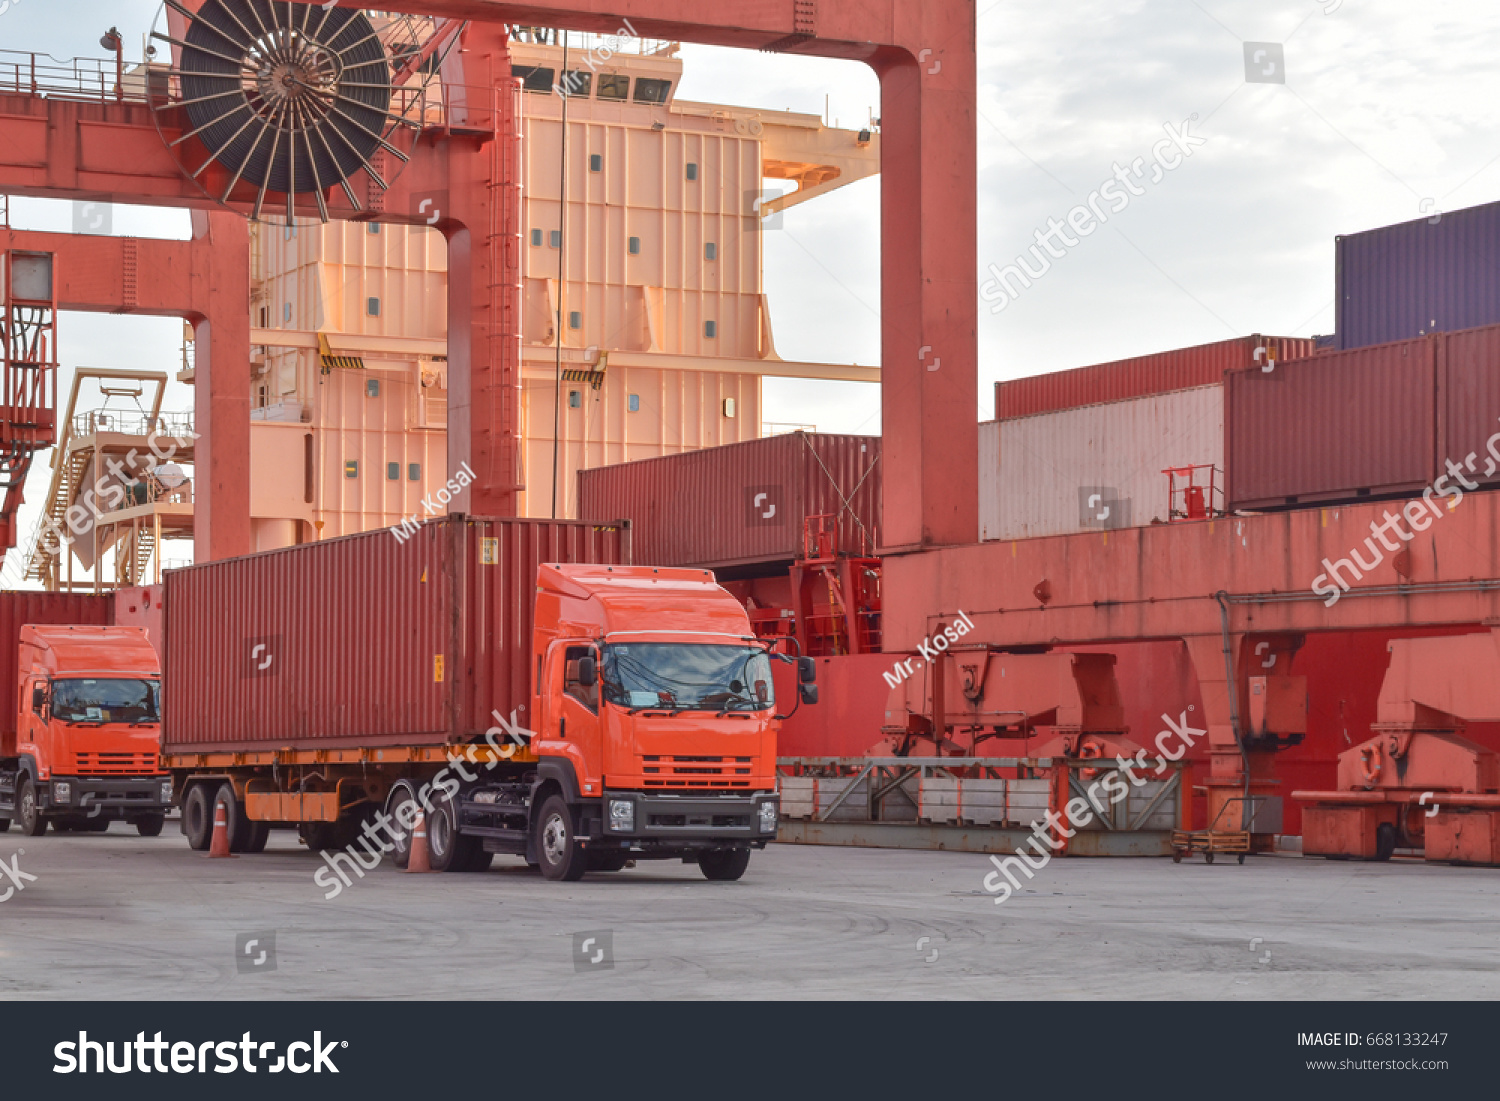 Seaport operation, container discharging from vessel. Truck picking up container from vessel. #668133247